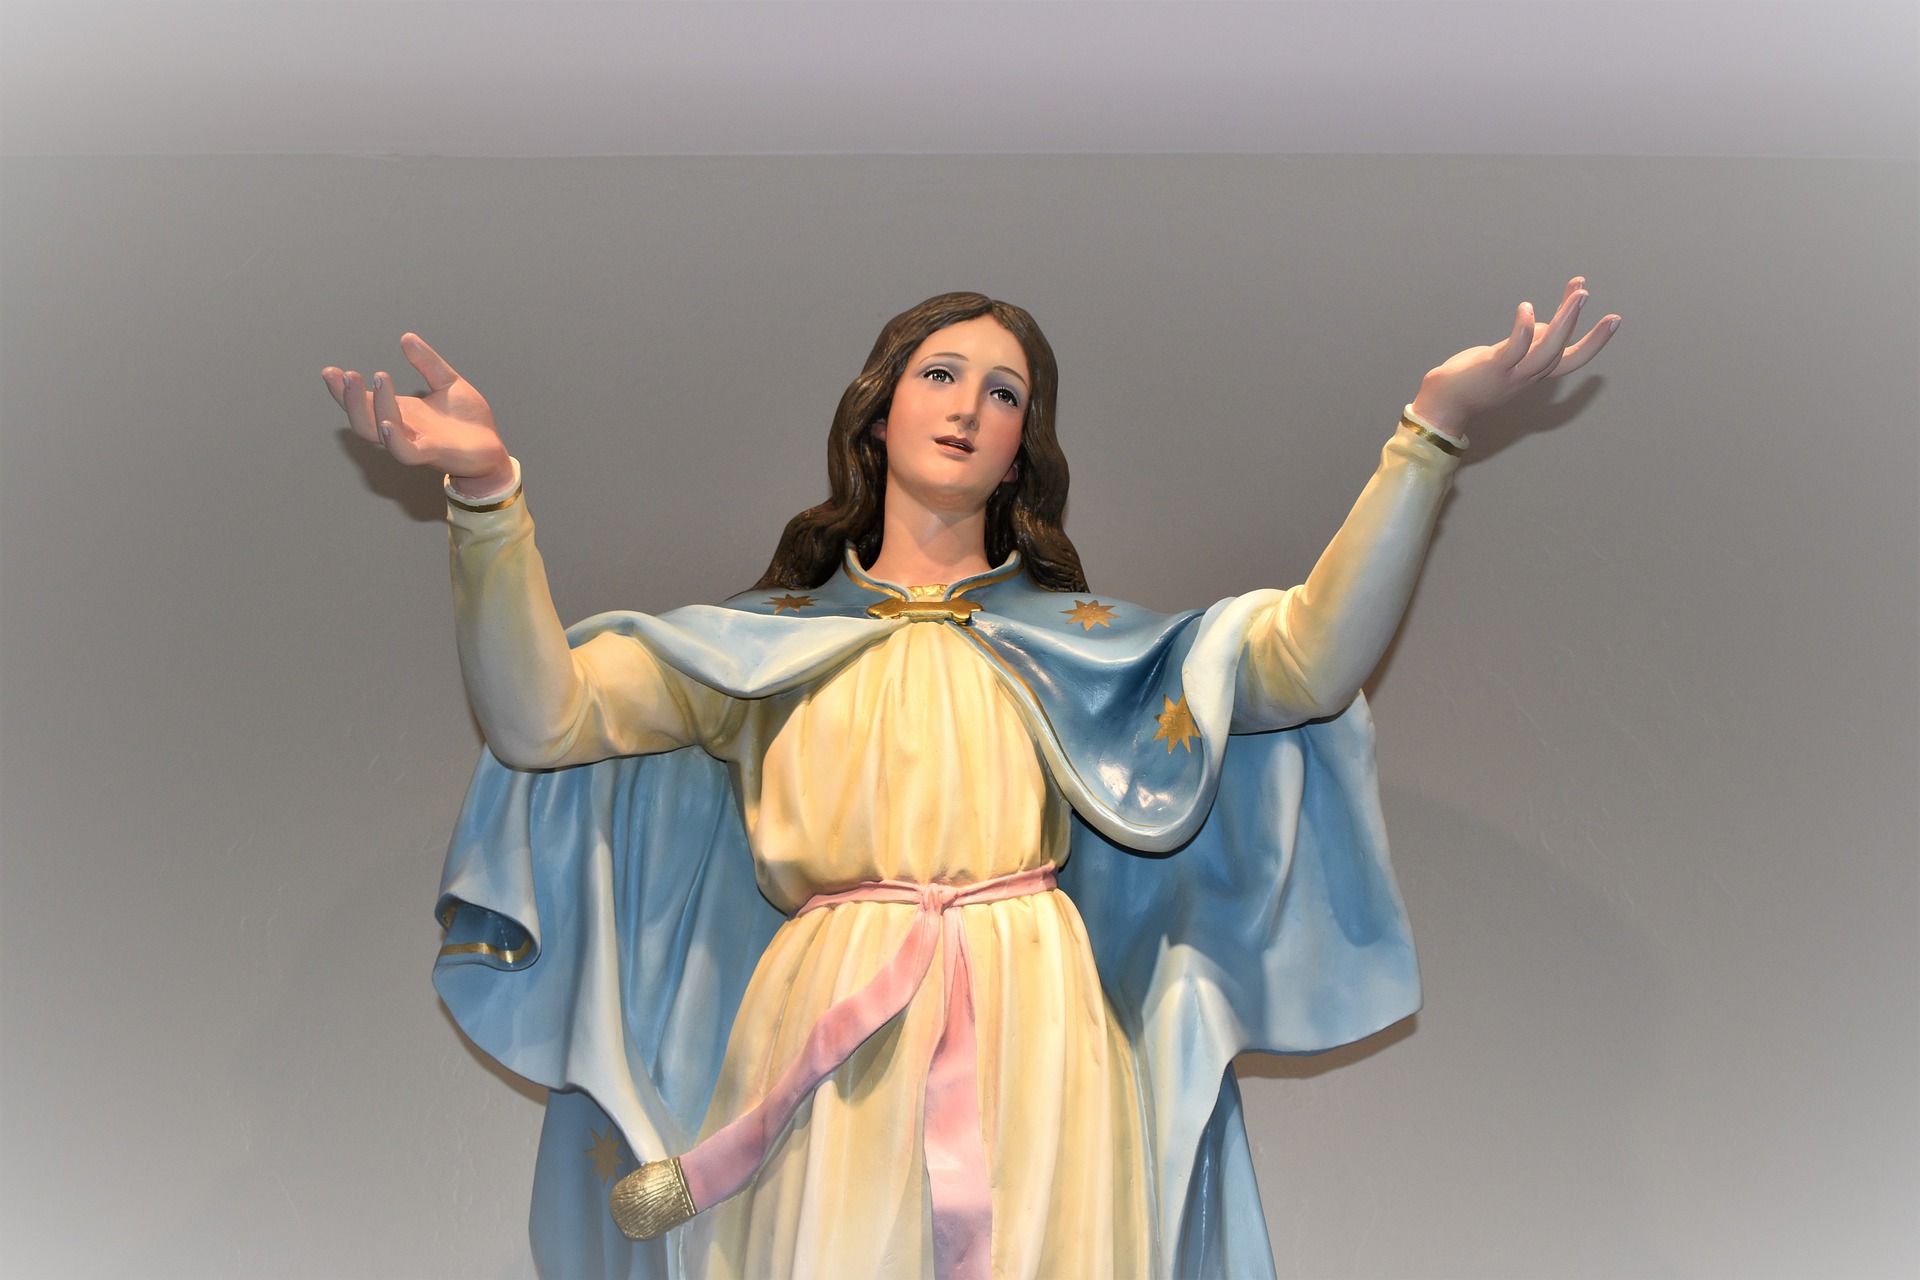 5 Facts to Ignore Before Accusing Catholics of “Mary Worship